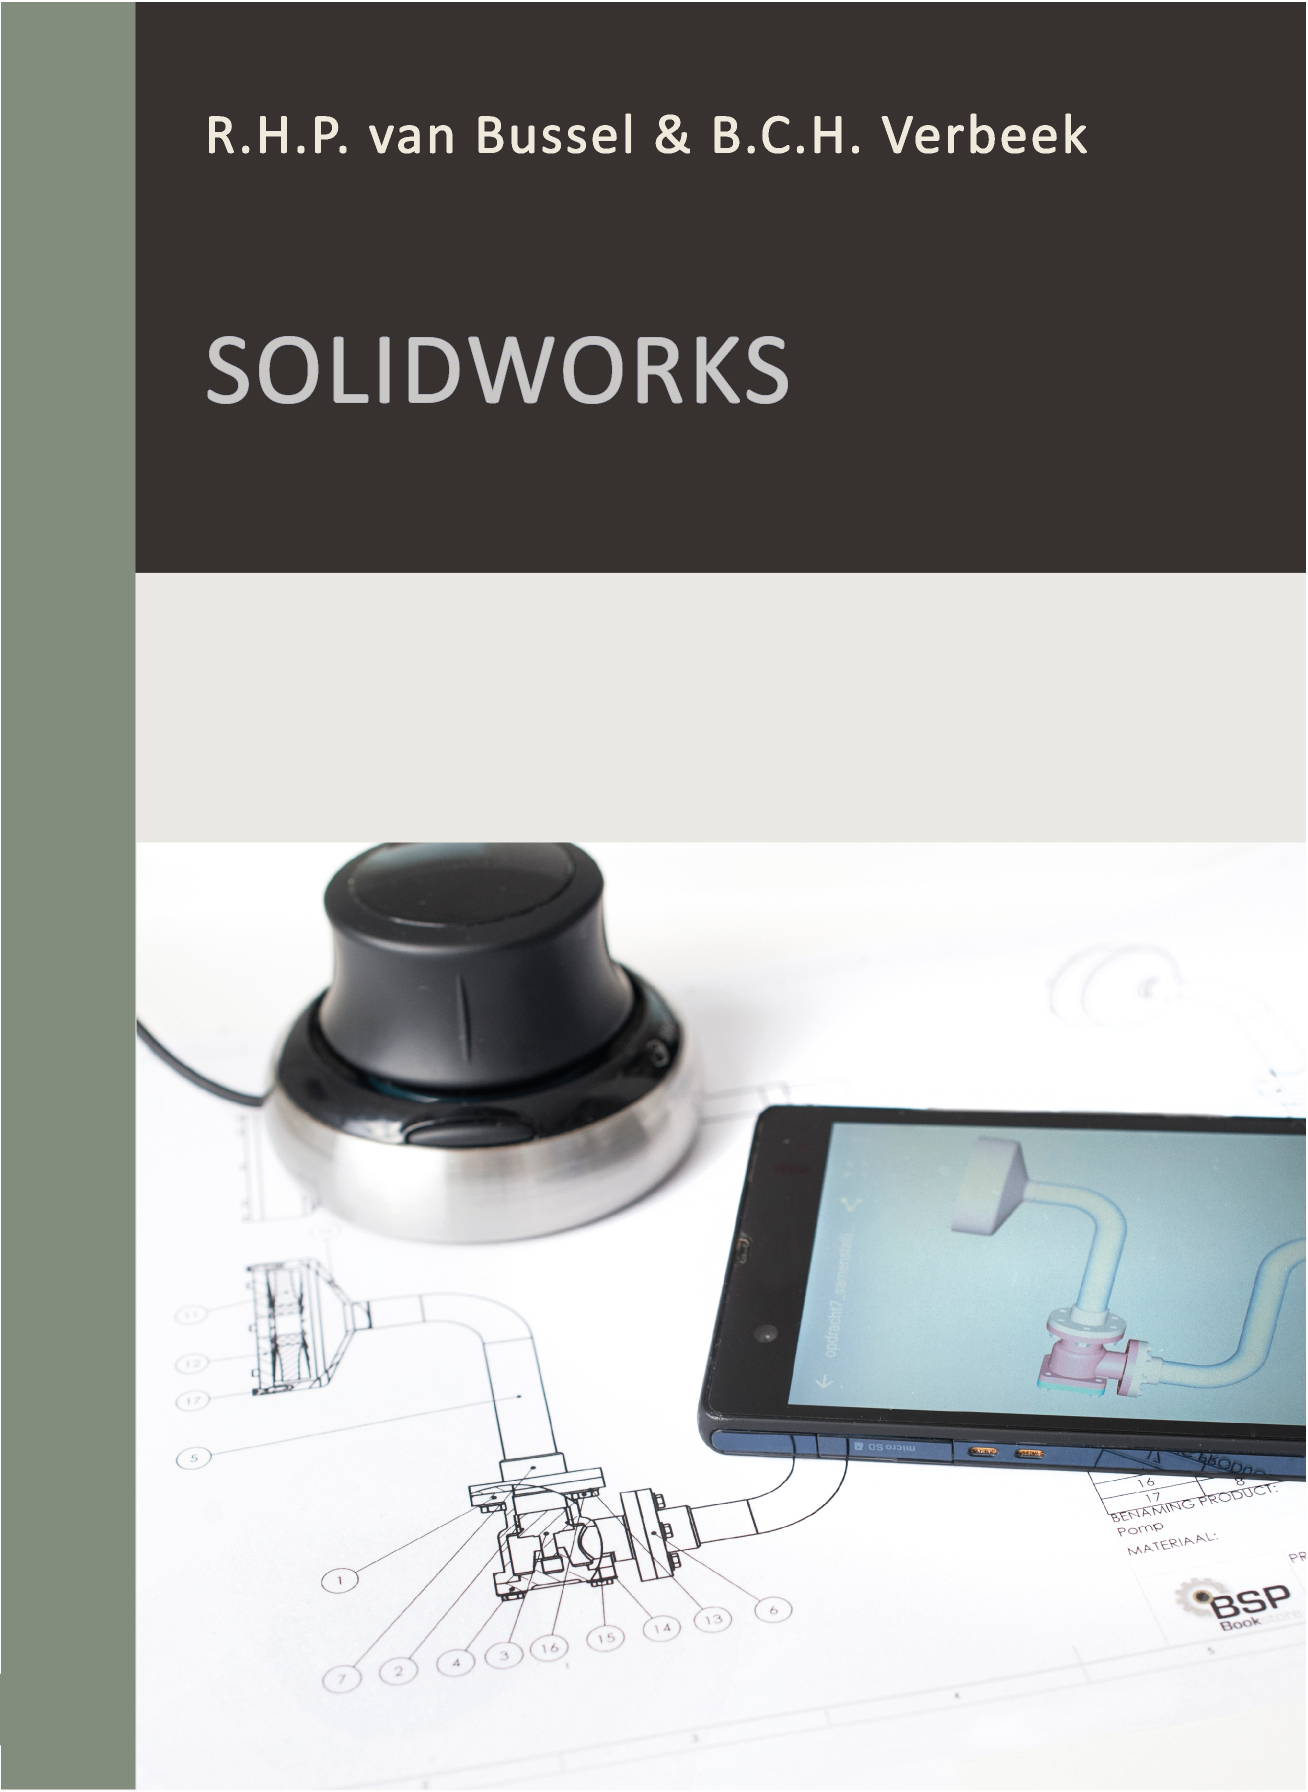 SolidWorks gevorderd's thumbnail image